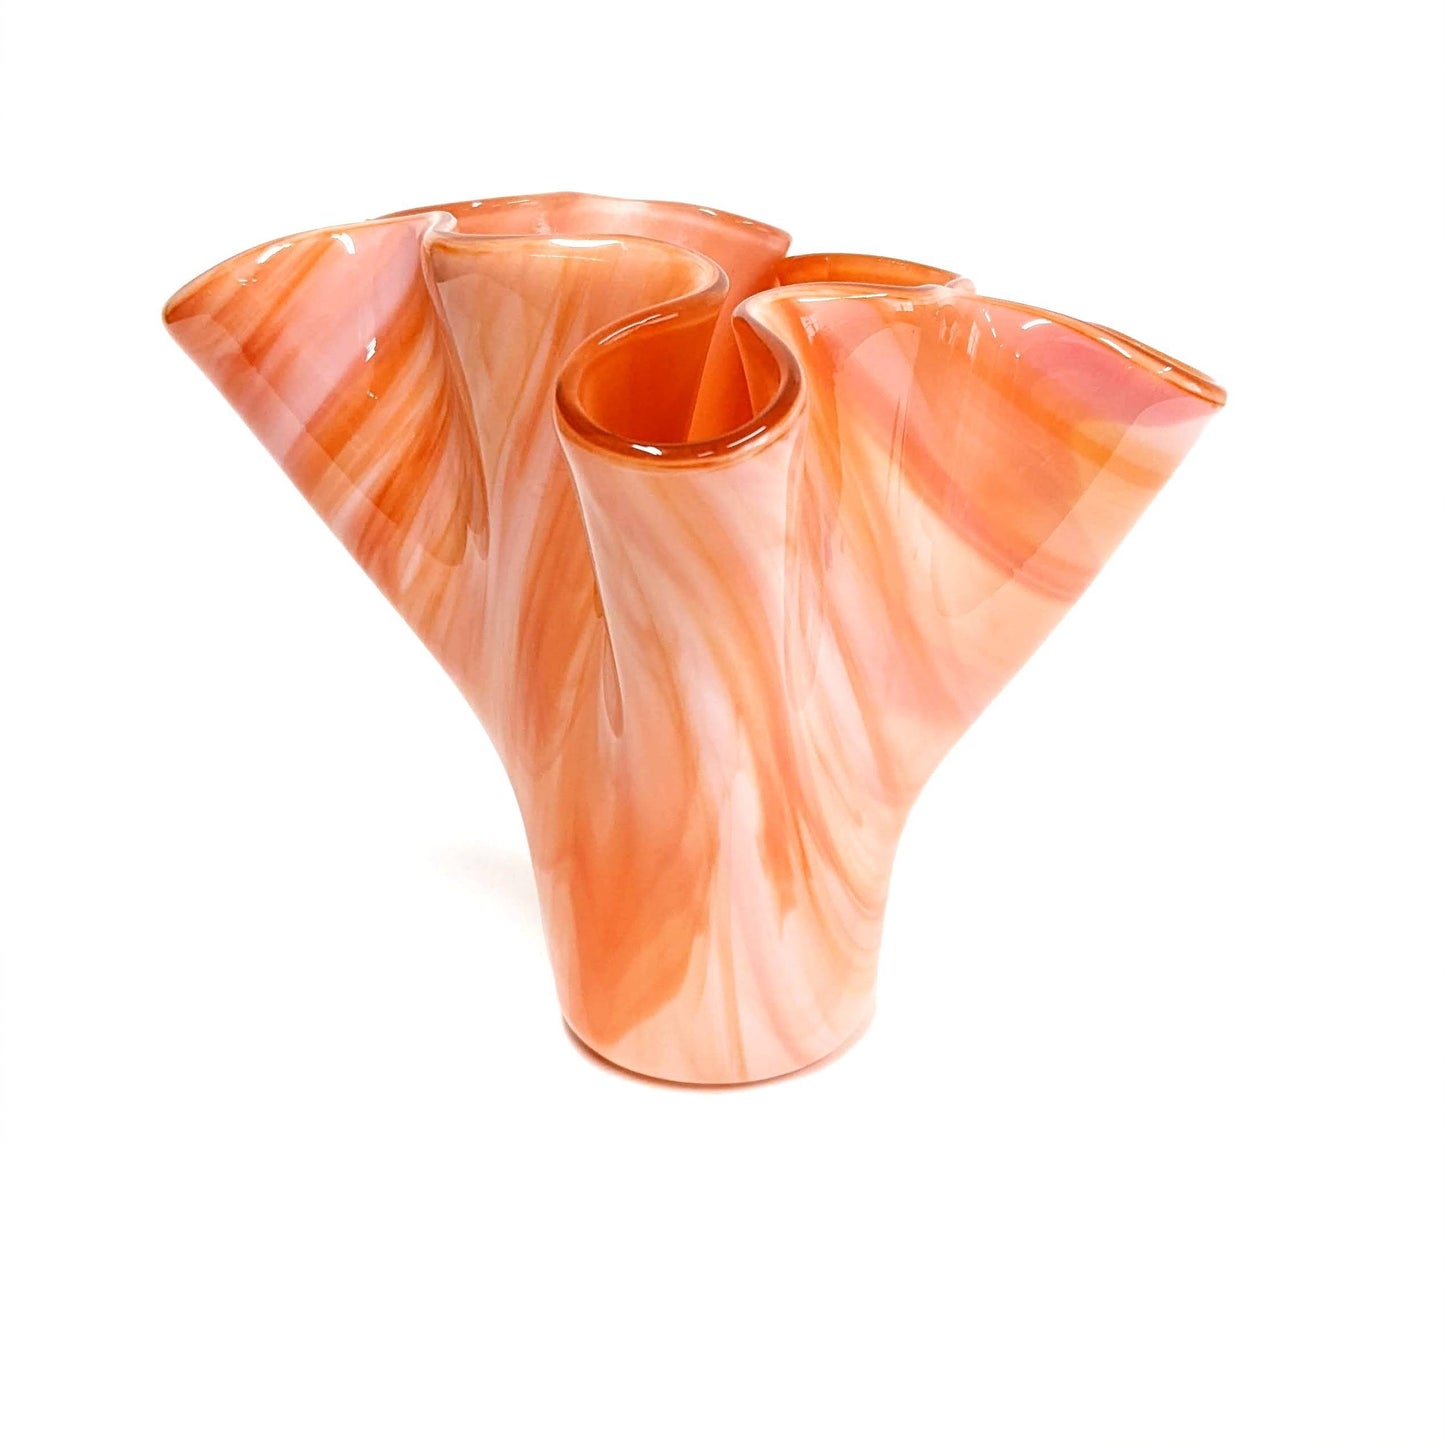 Glass Art Abstract Vase in Sunrise Orange Peach and White